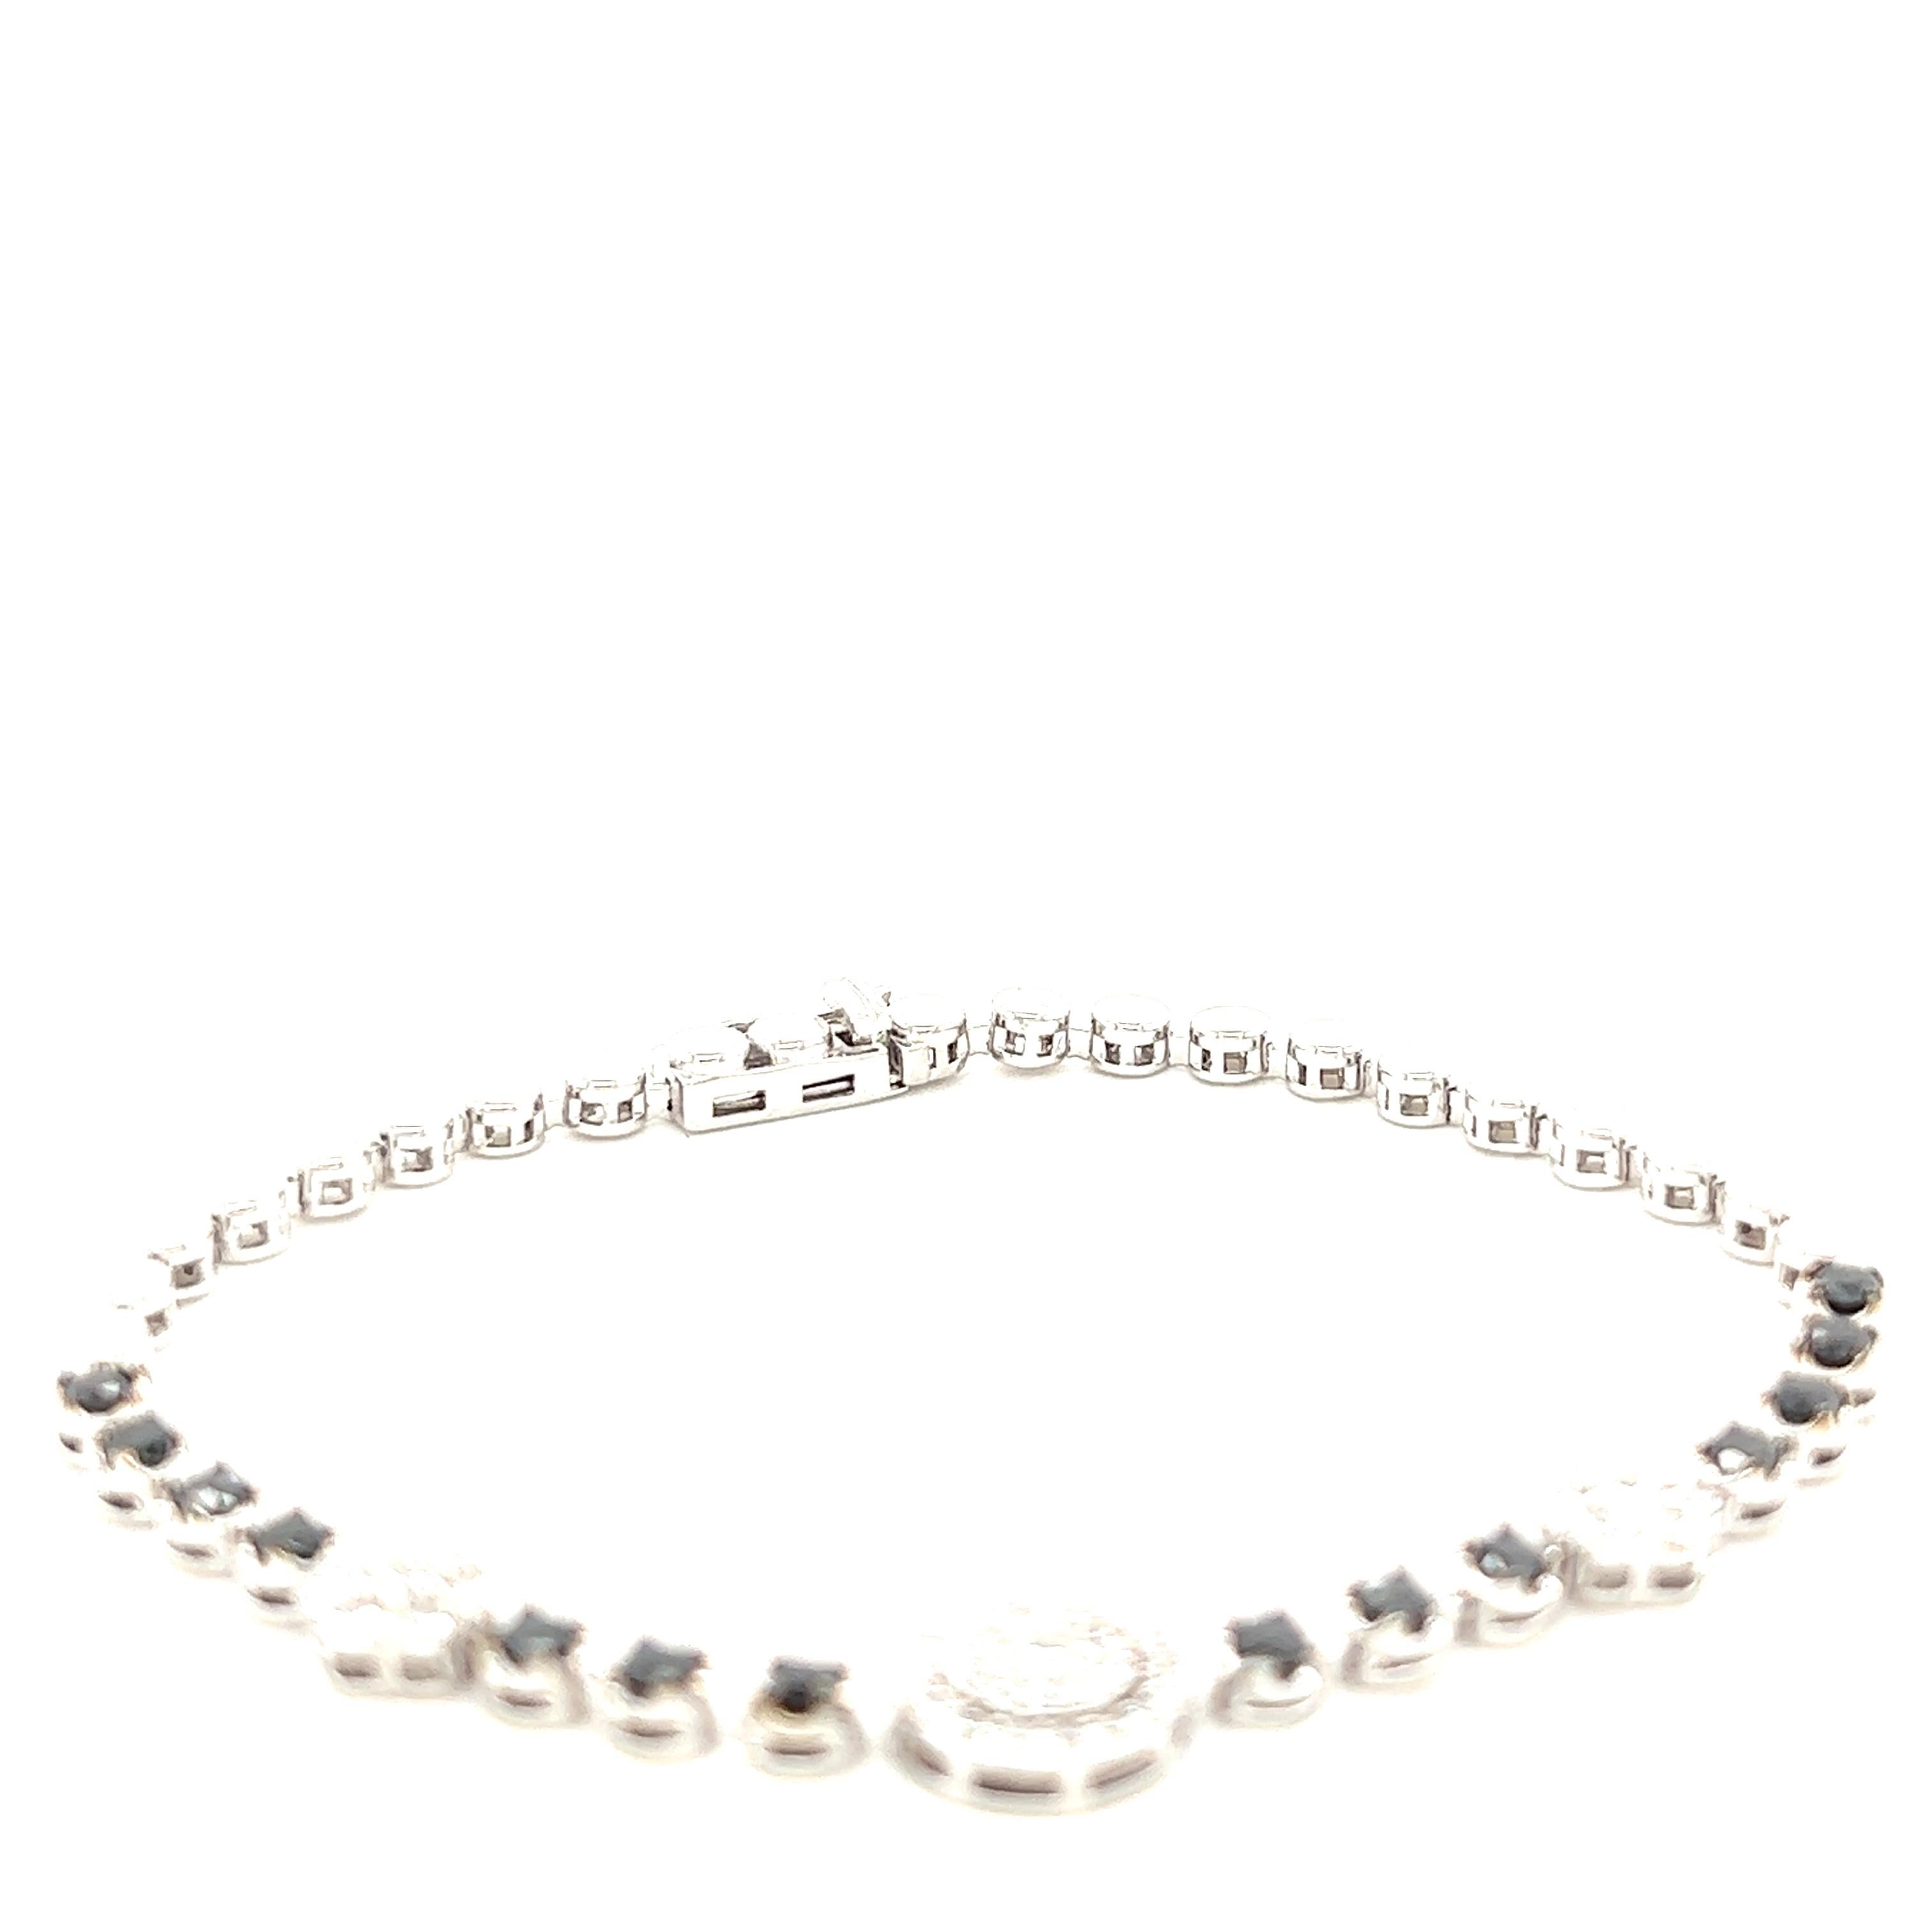 This bracelet has Natural Round Cut Black Diamonds that weigh 1.11 carats and Natural Round Cut Diamonds that weigh 0.93 carats, (Clarity: SI, Color: F)

It is set in 14 Karat White Gold and has an approximate gold gram of 9.0 grams.

The bracelet